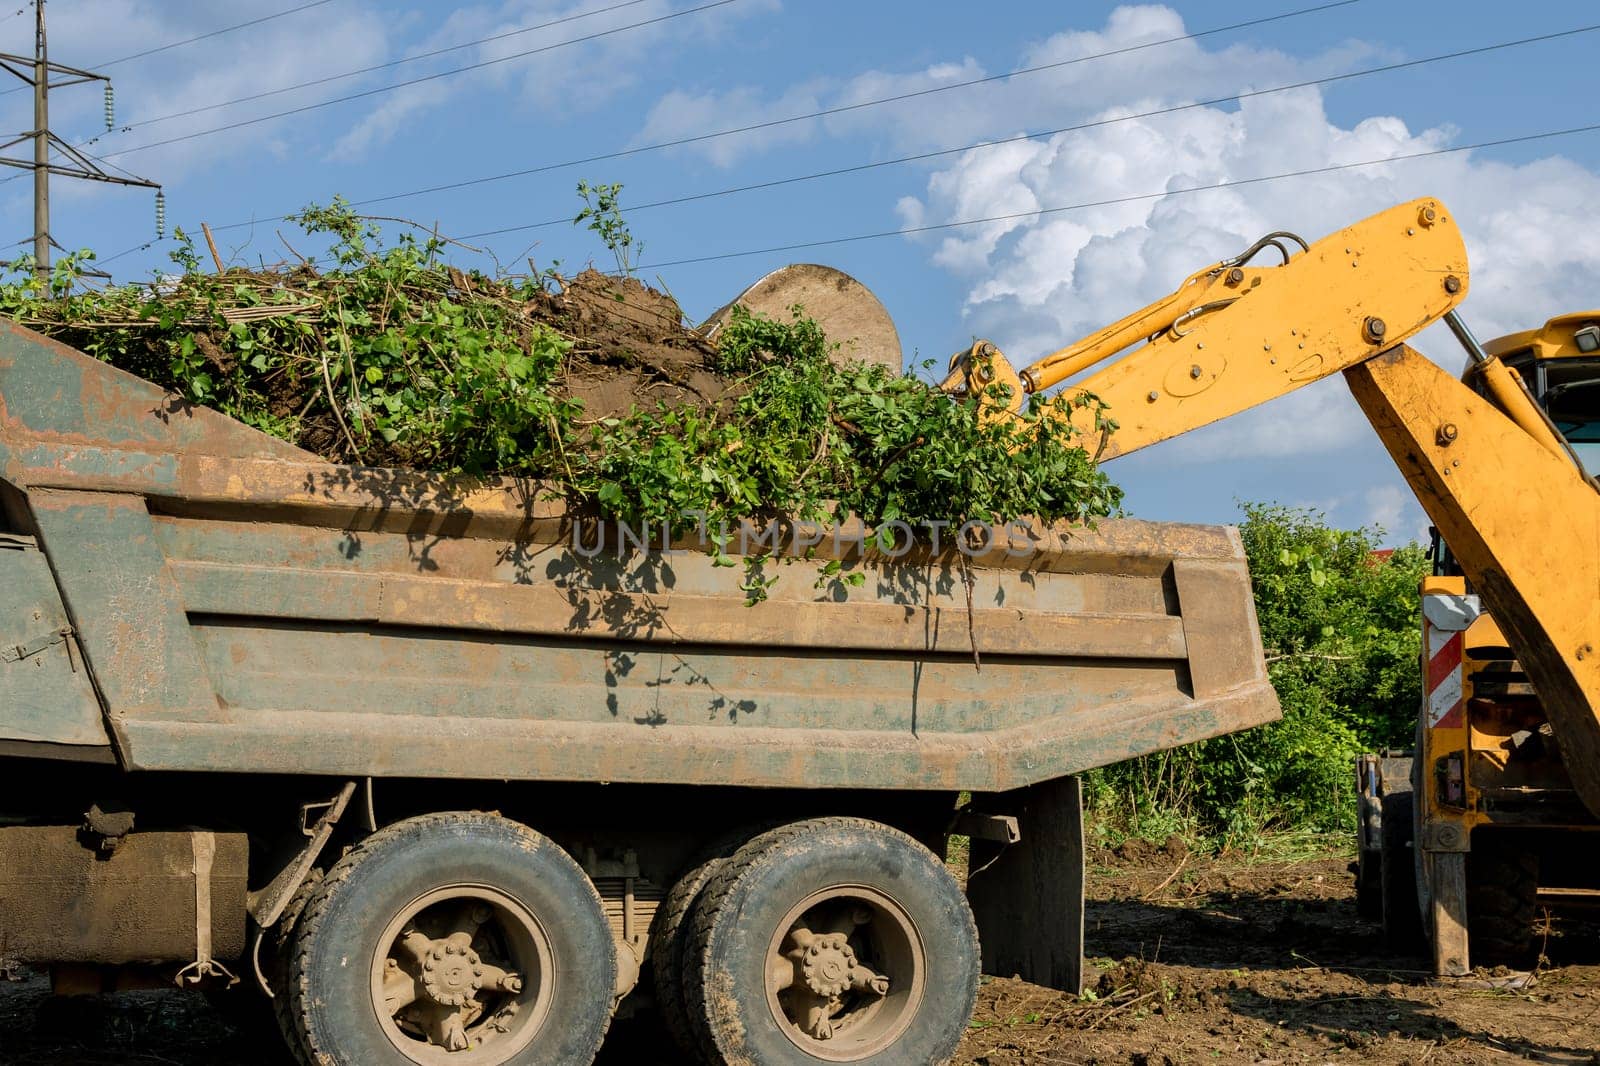 Excavator's powerful bucket dumps bushes and trees onto trailer. by Yaroslav